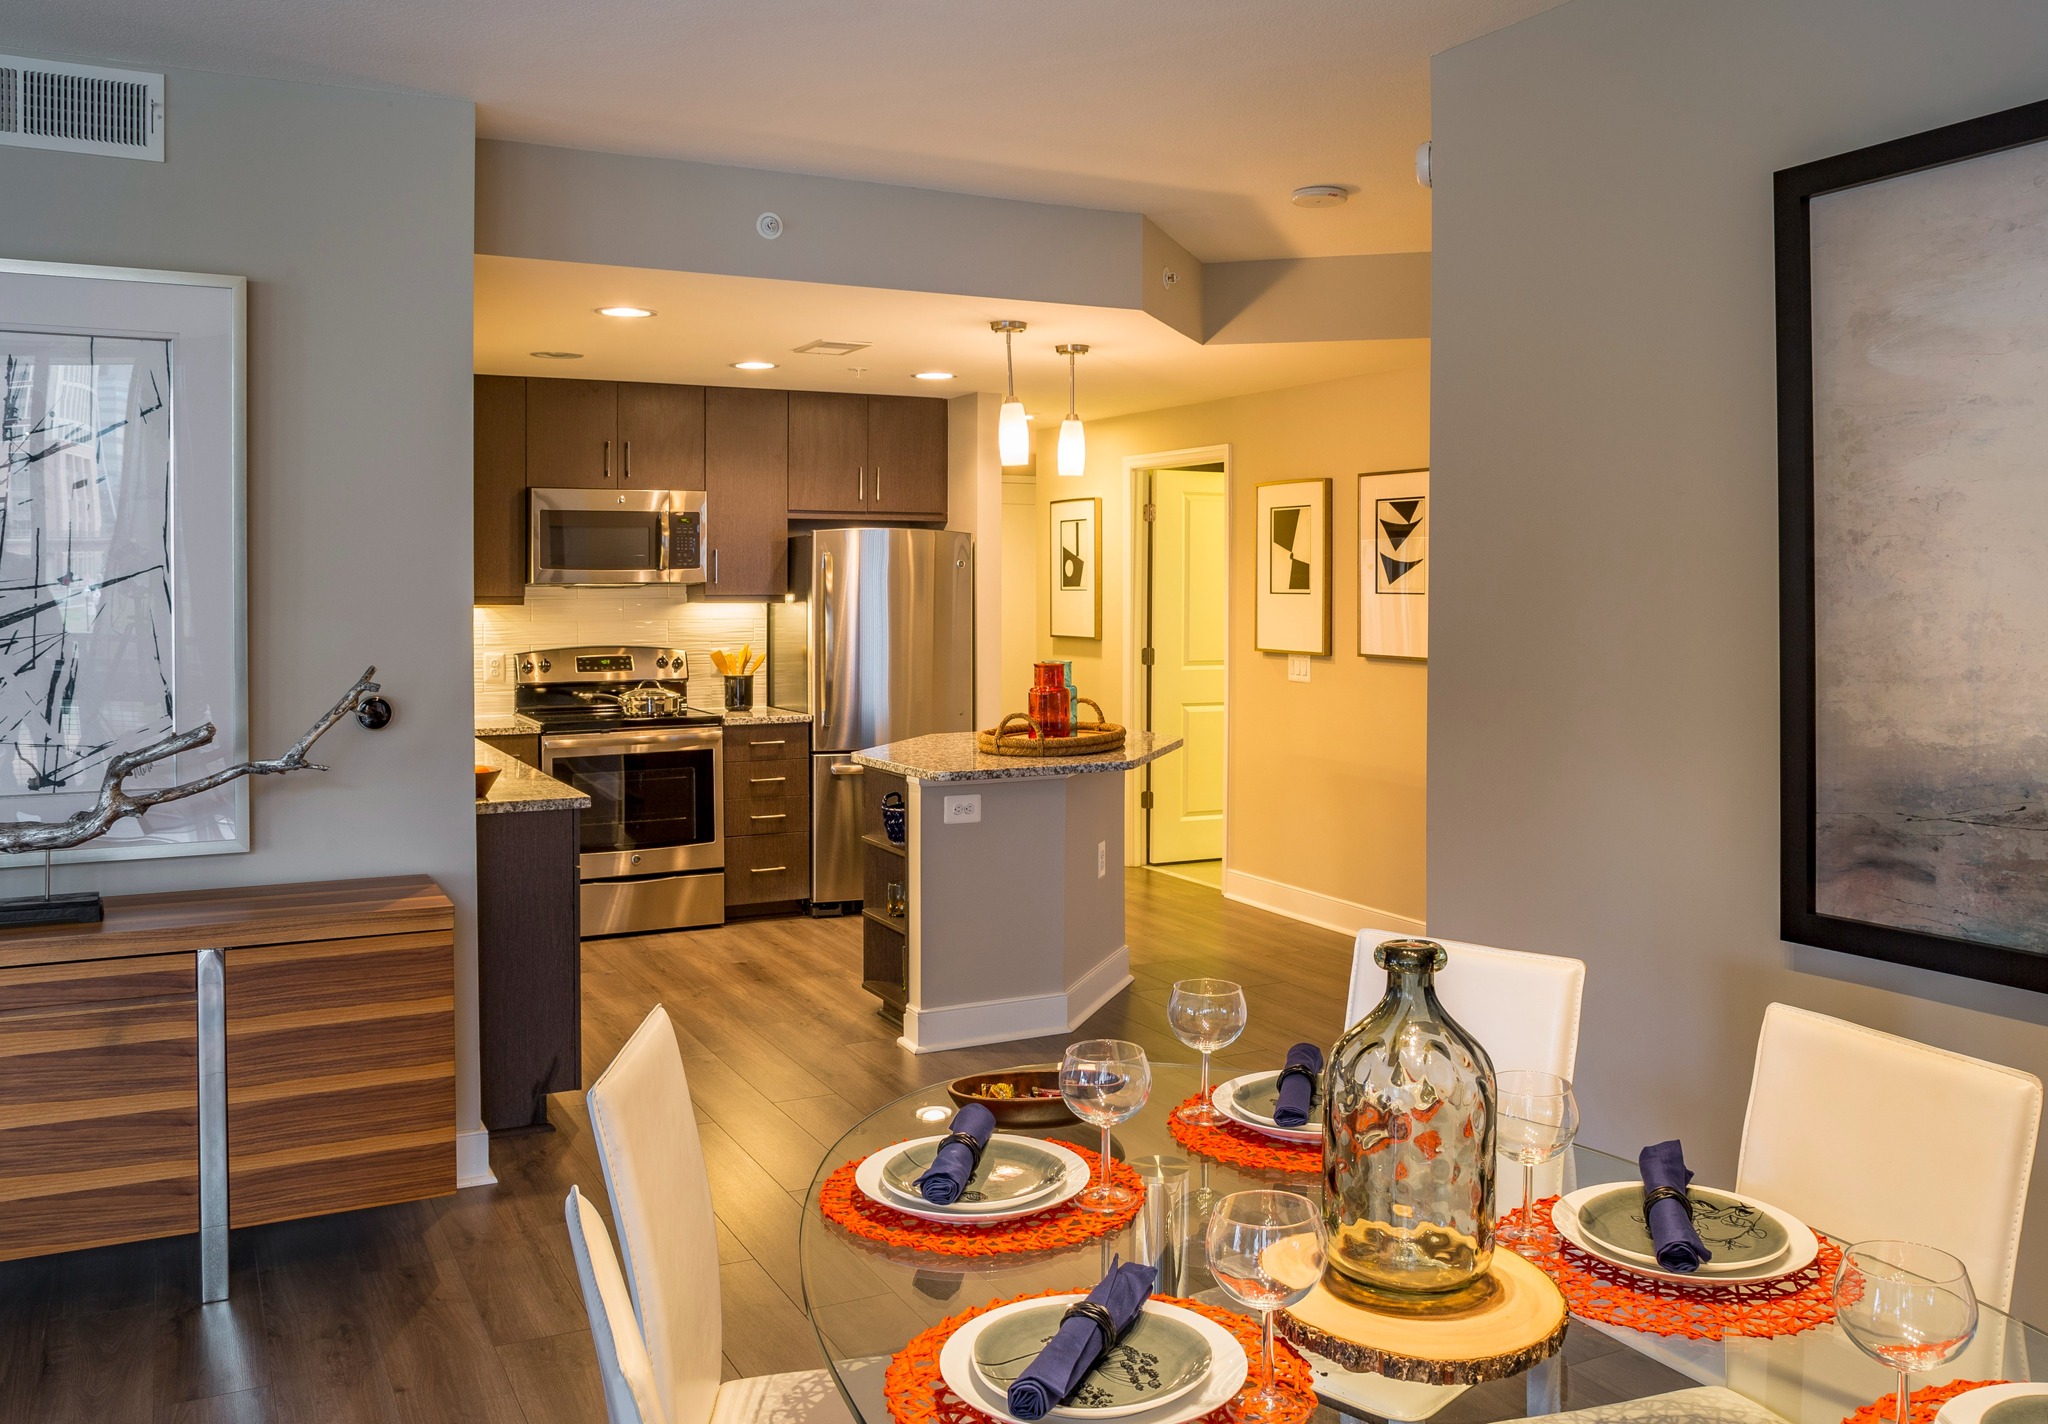 Image of Wood-Style Flooring in Kitchen & Living Areas | Parc Meridian at Eisenhower Station | Luxury Alexandria VA Apartments